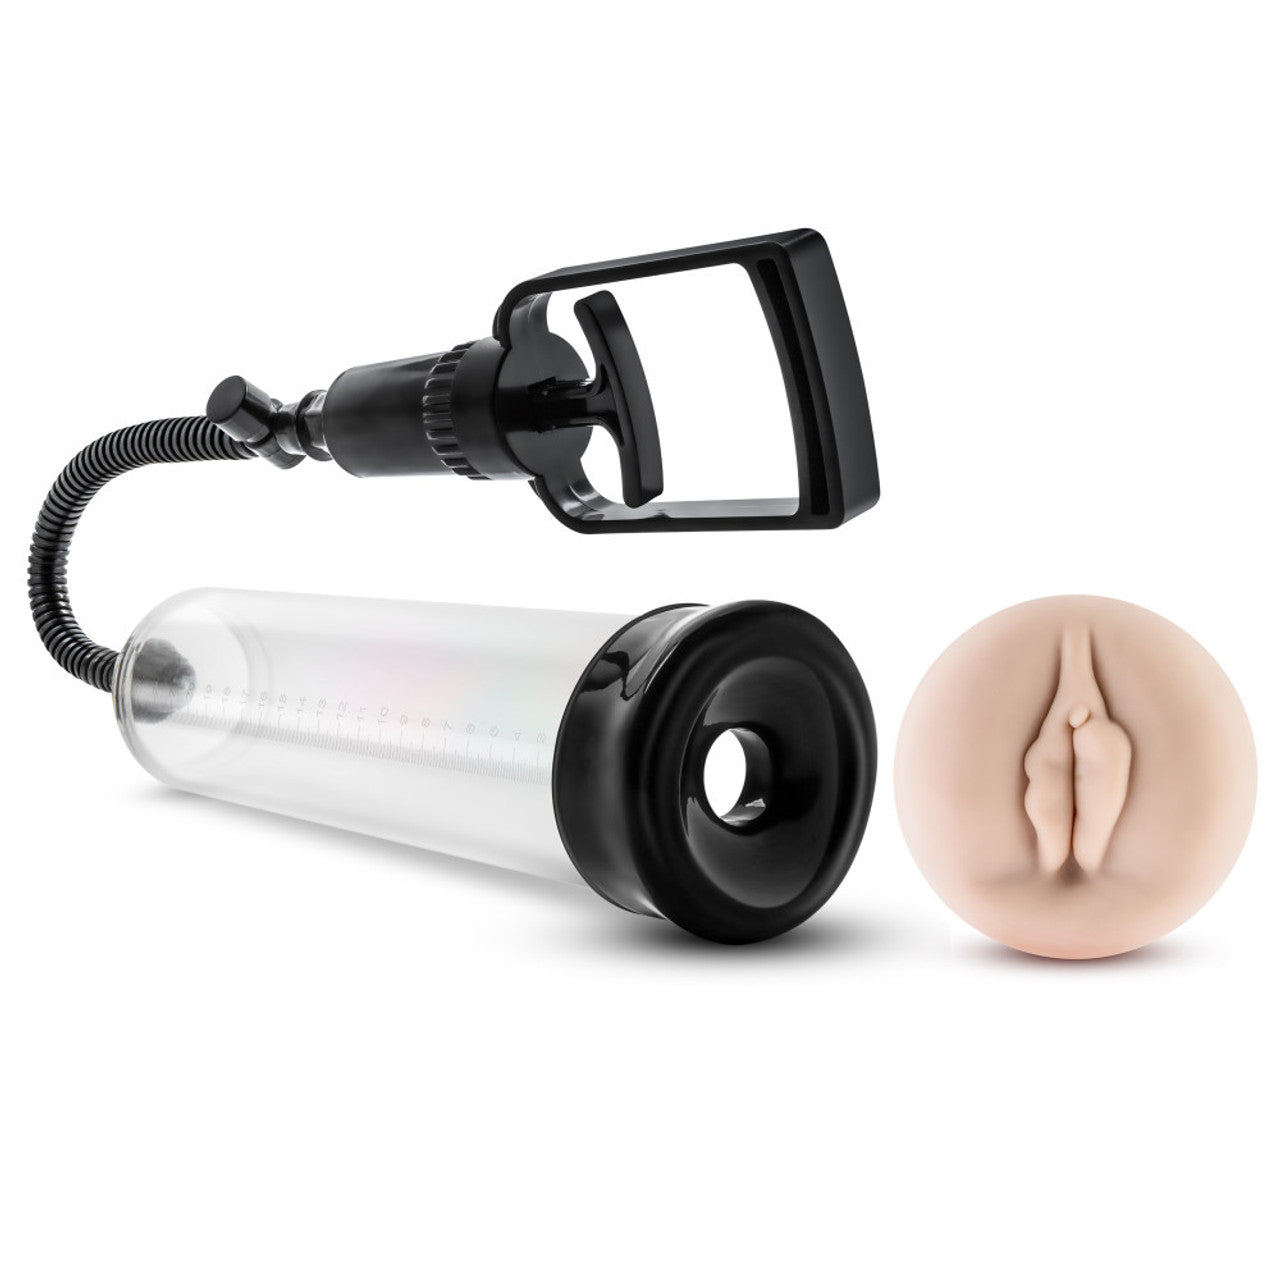 VX5 Male Enhancement Pump System - Clear - Thorn & Feather